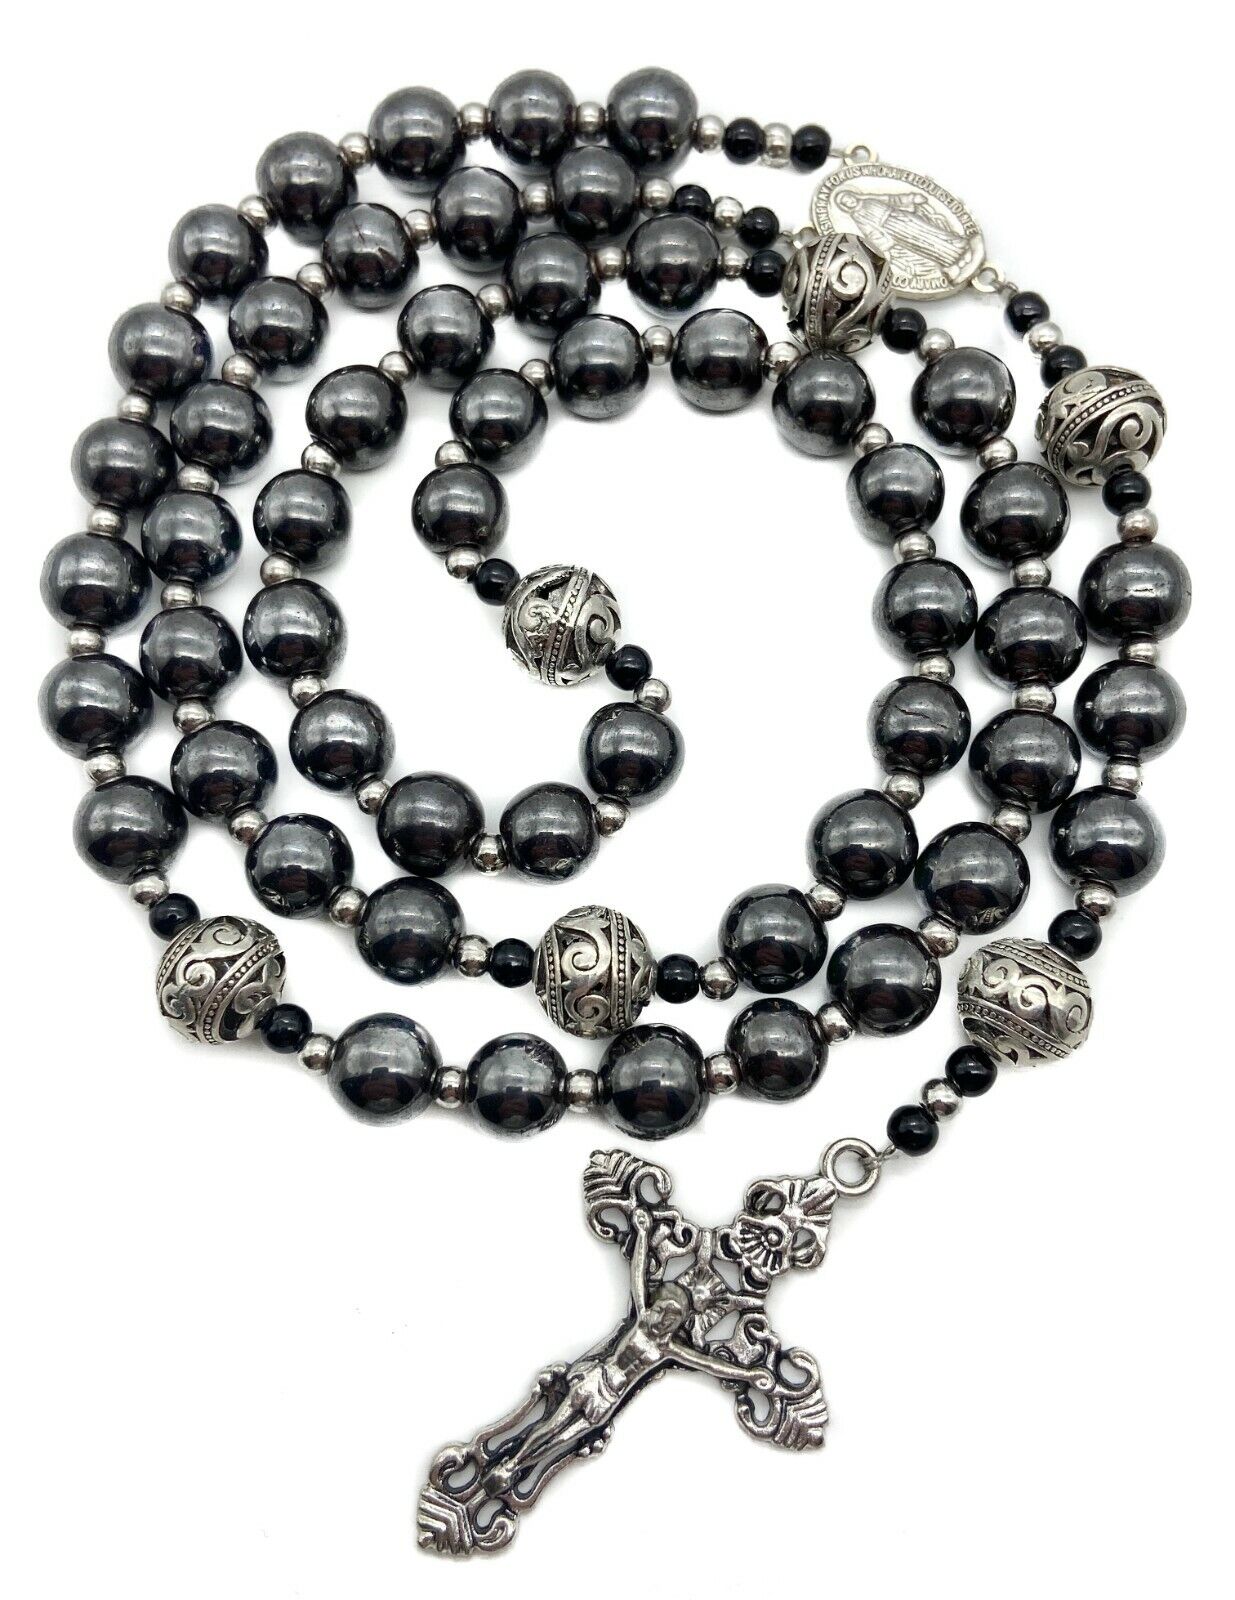 Hematite Rosary Black Stone Beads Metal Beaded Necklace Mary Miraculous Medal